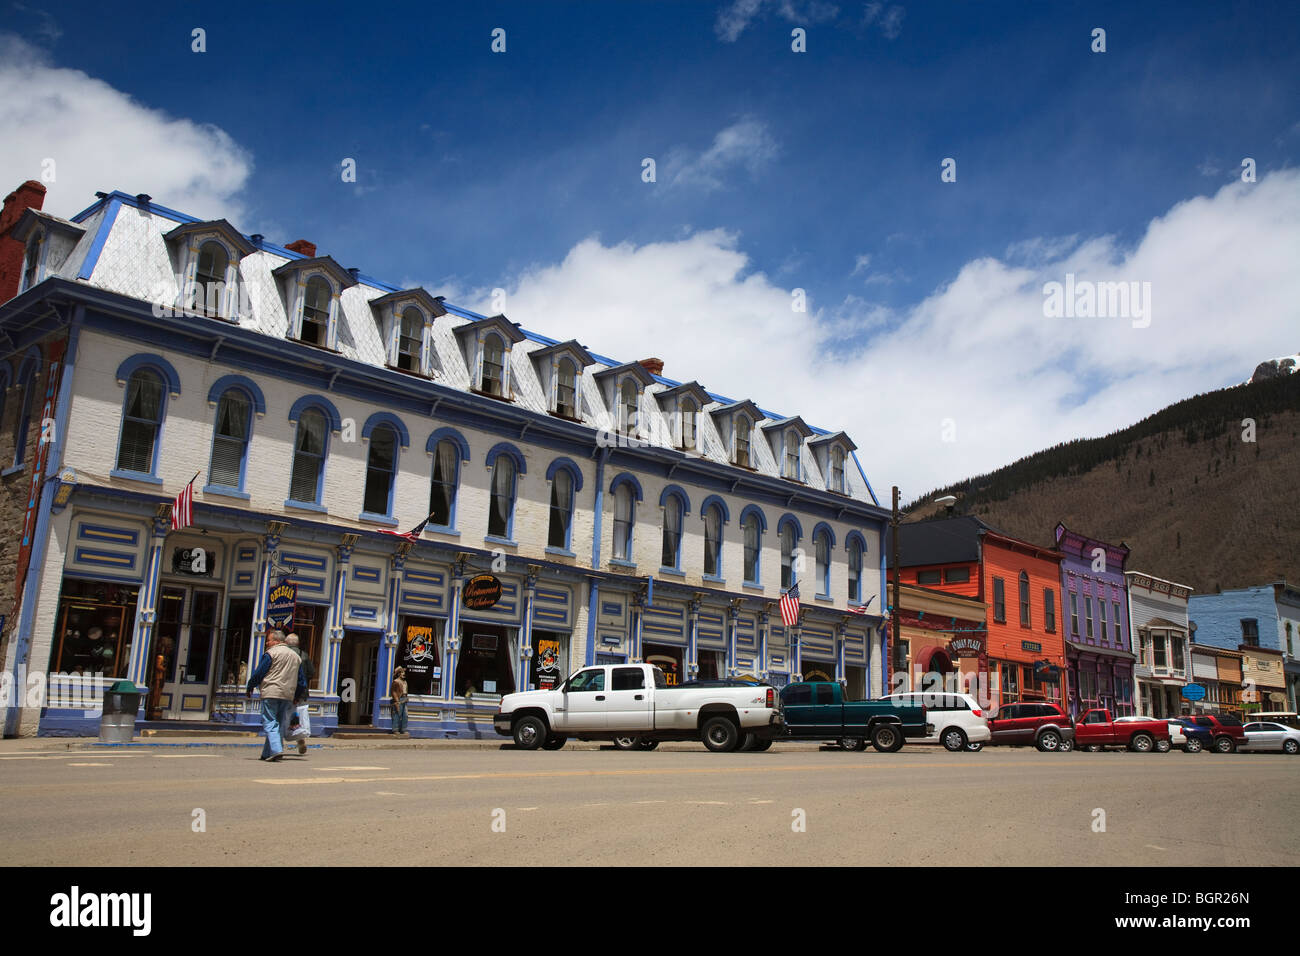 Victorian buildings in Main Street Silverton, old west mining town, elevation of 9,318 feet in San Juan County Colorado, USA Stock Photo